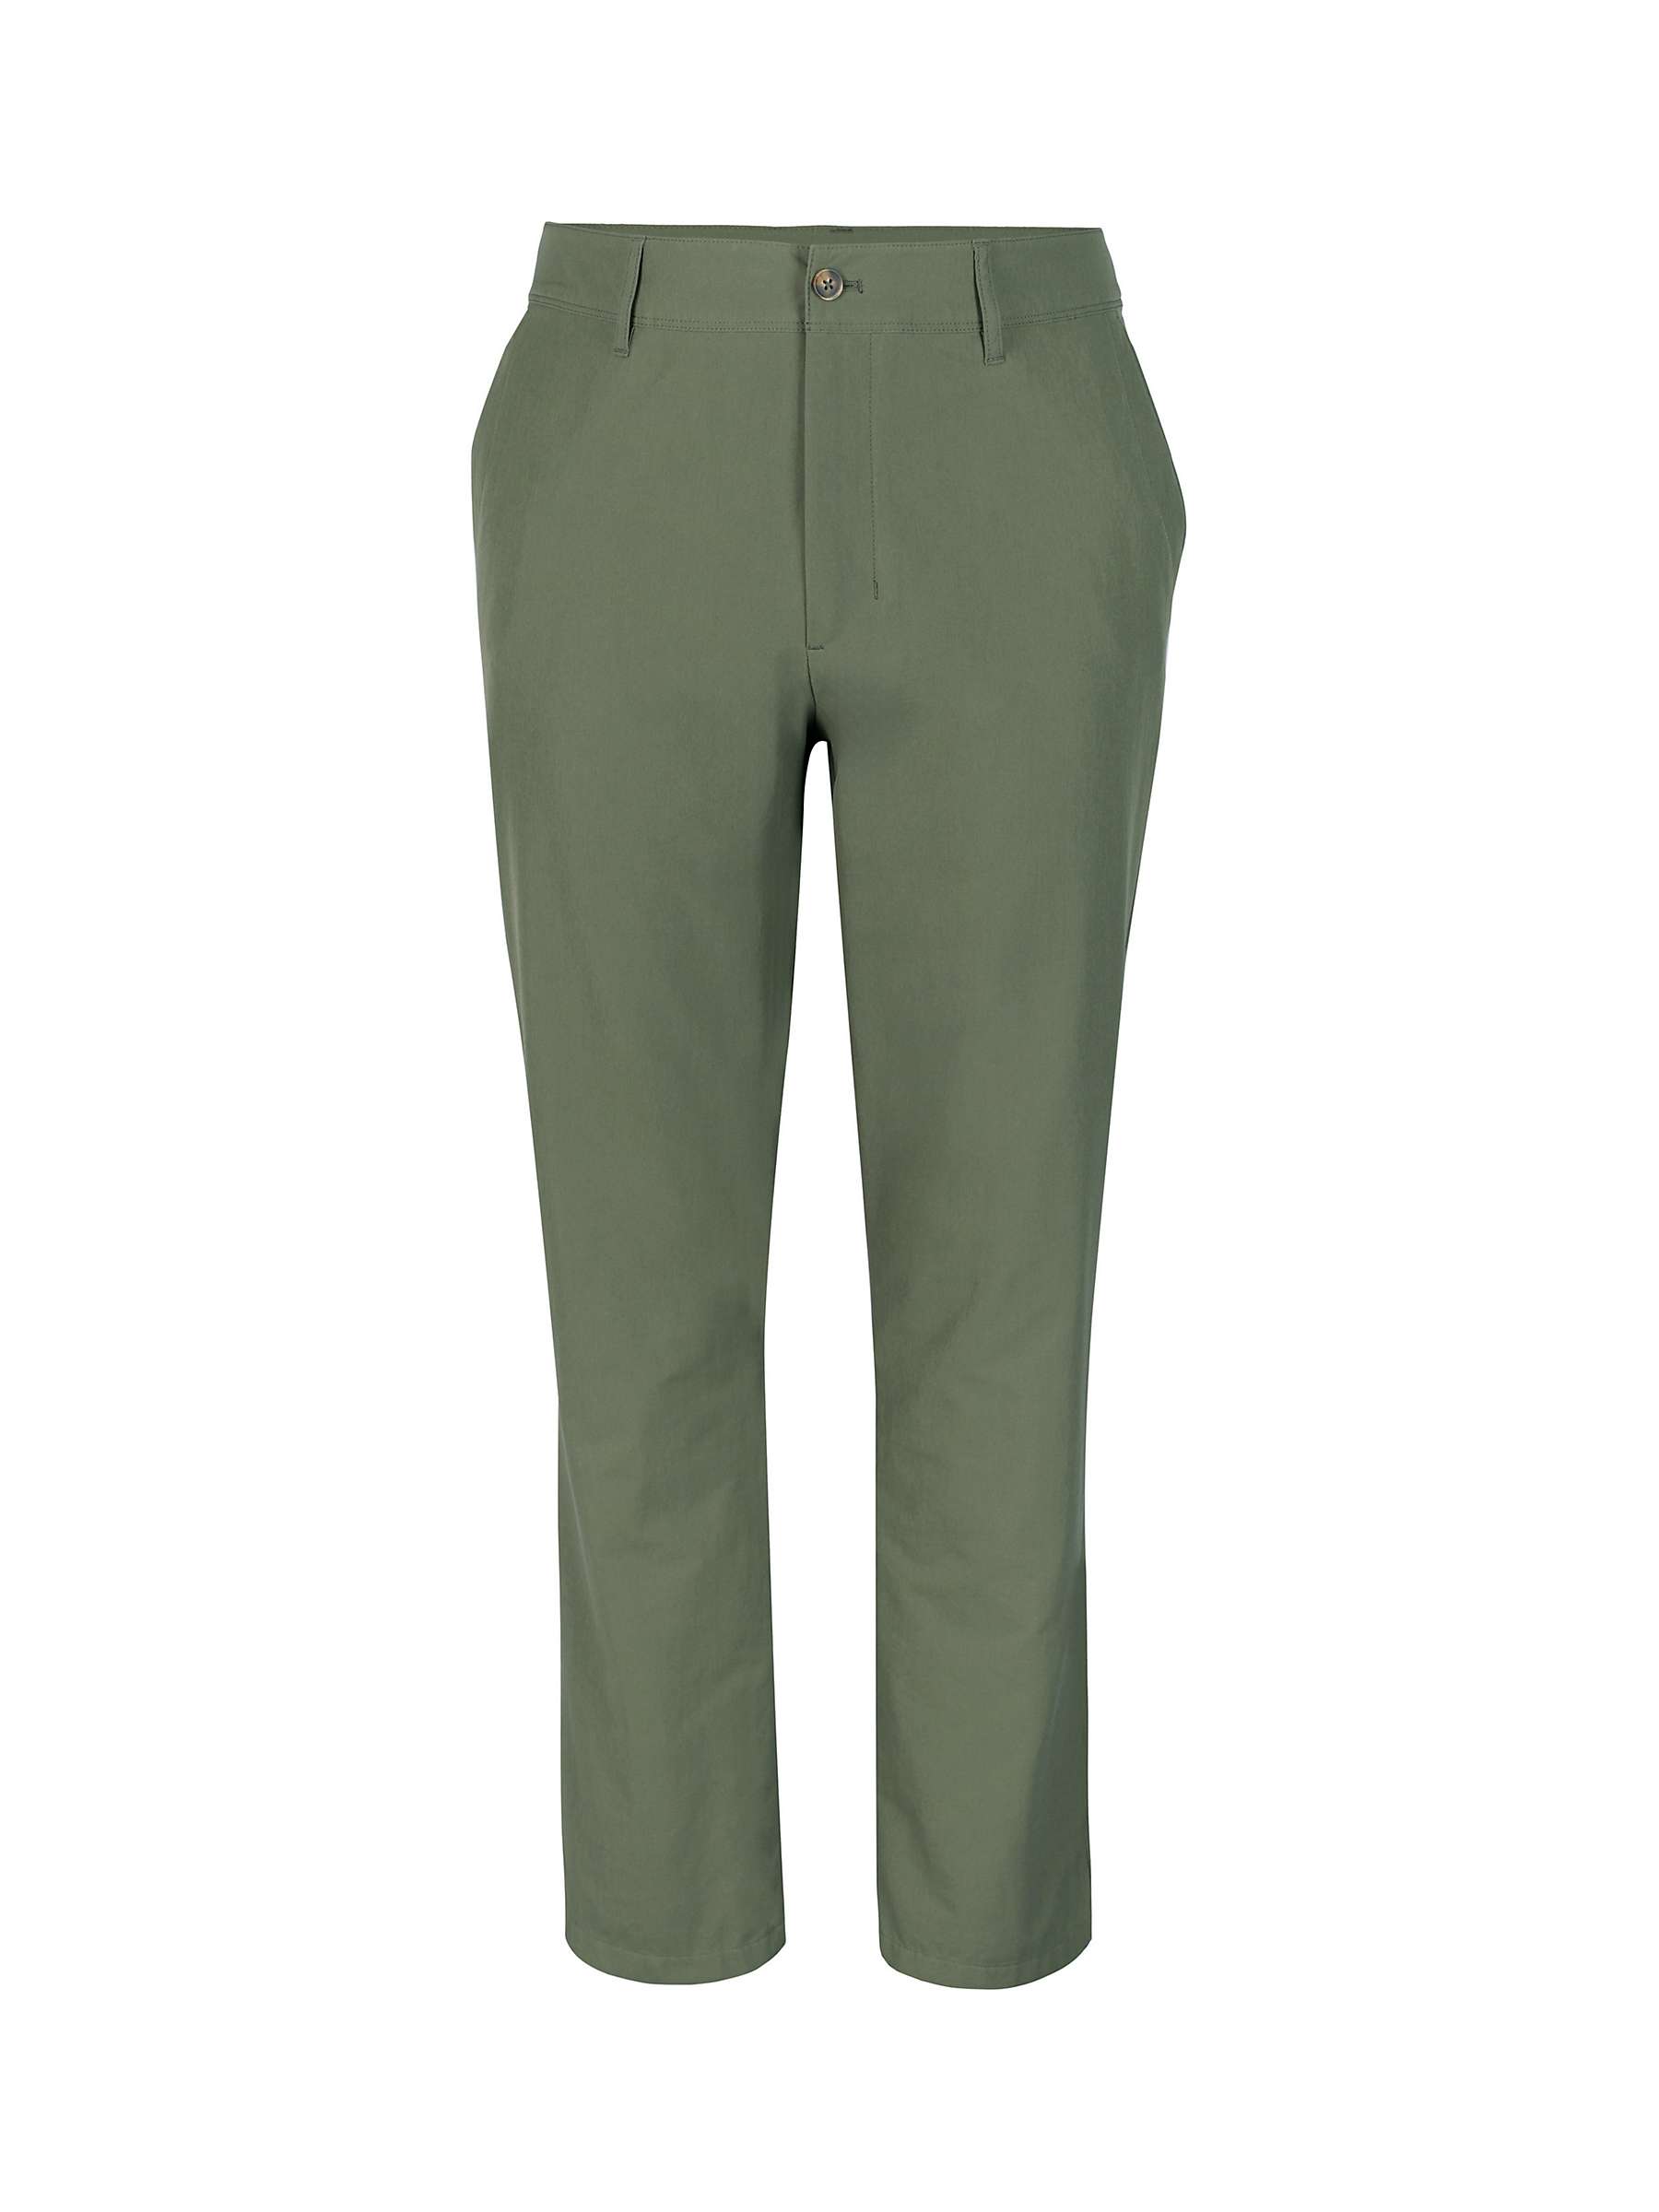 Buy Rohan Riviera Stretch Trousers Online at johnlewis.com